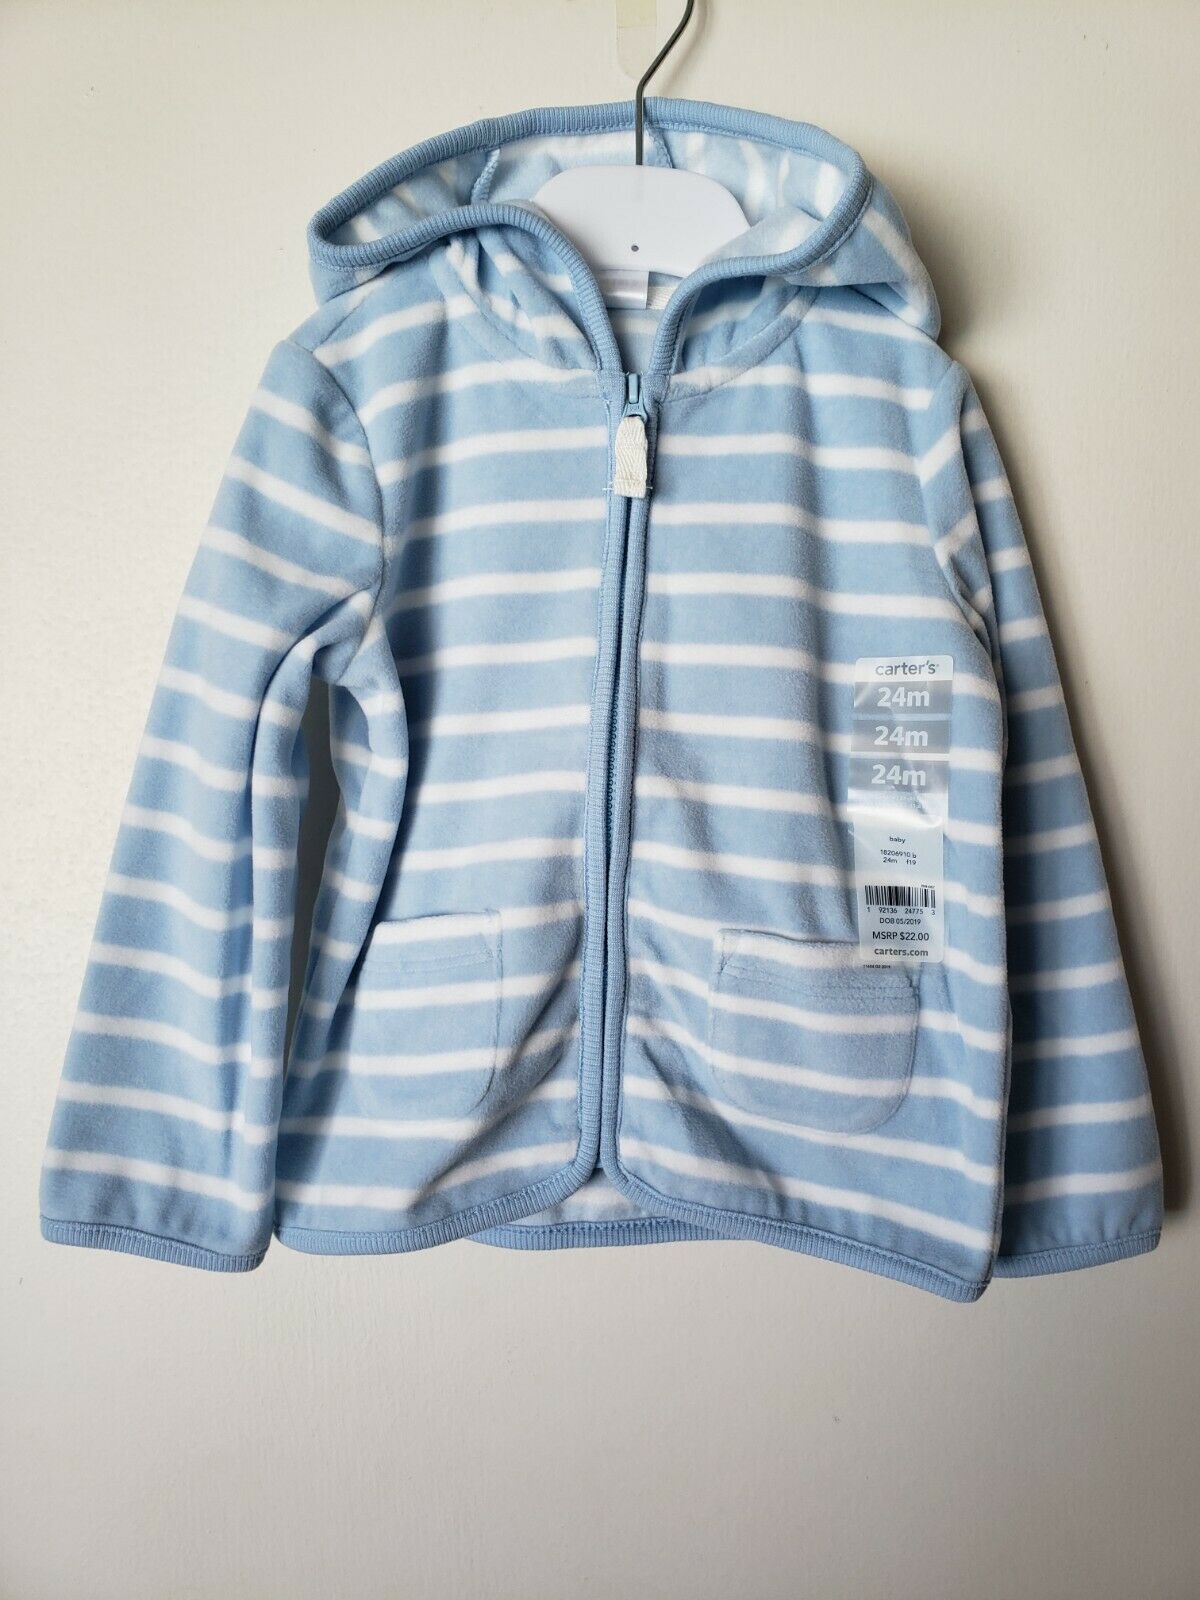 Carter's Baby Boy 24 Months Fleece Zip Up Hooded Sweater Nwt Blue White Striped